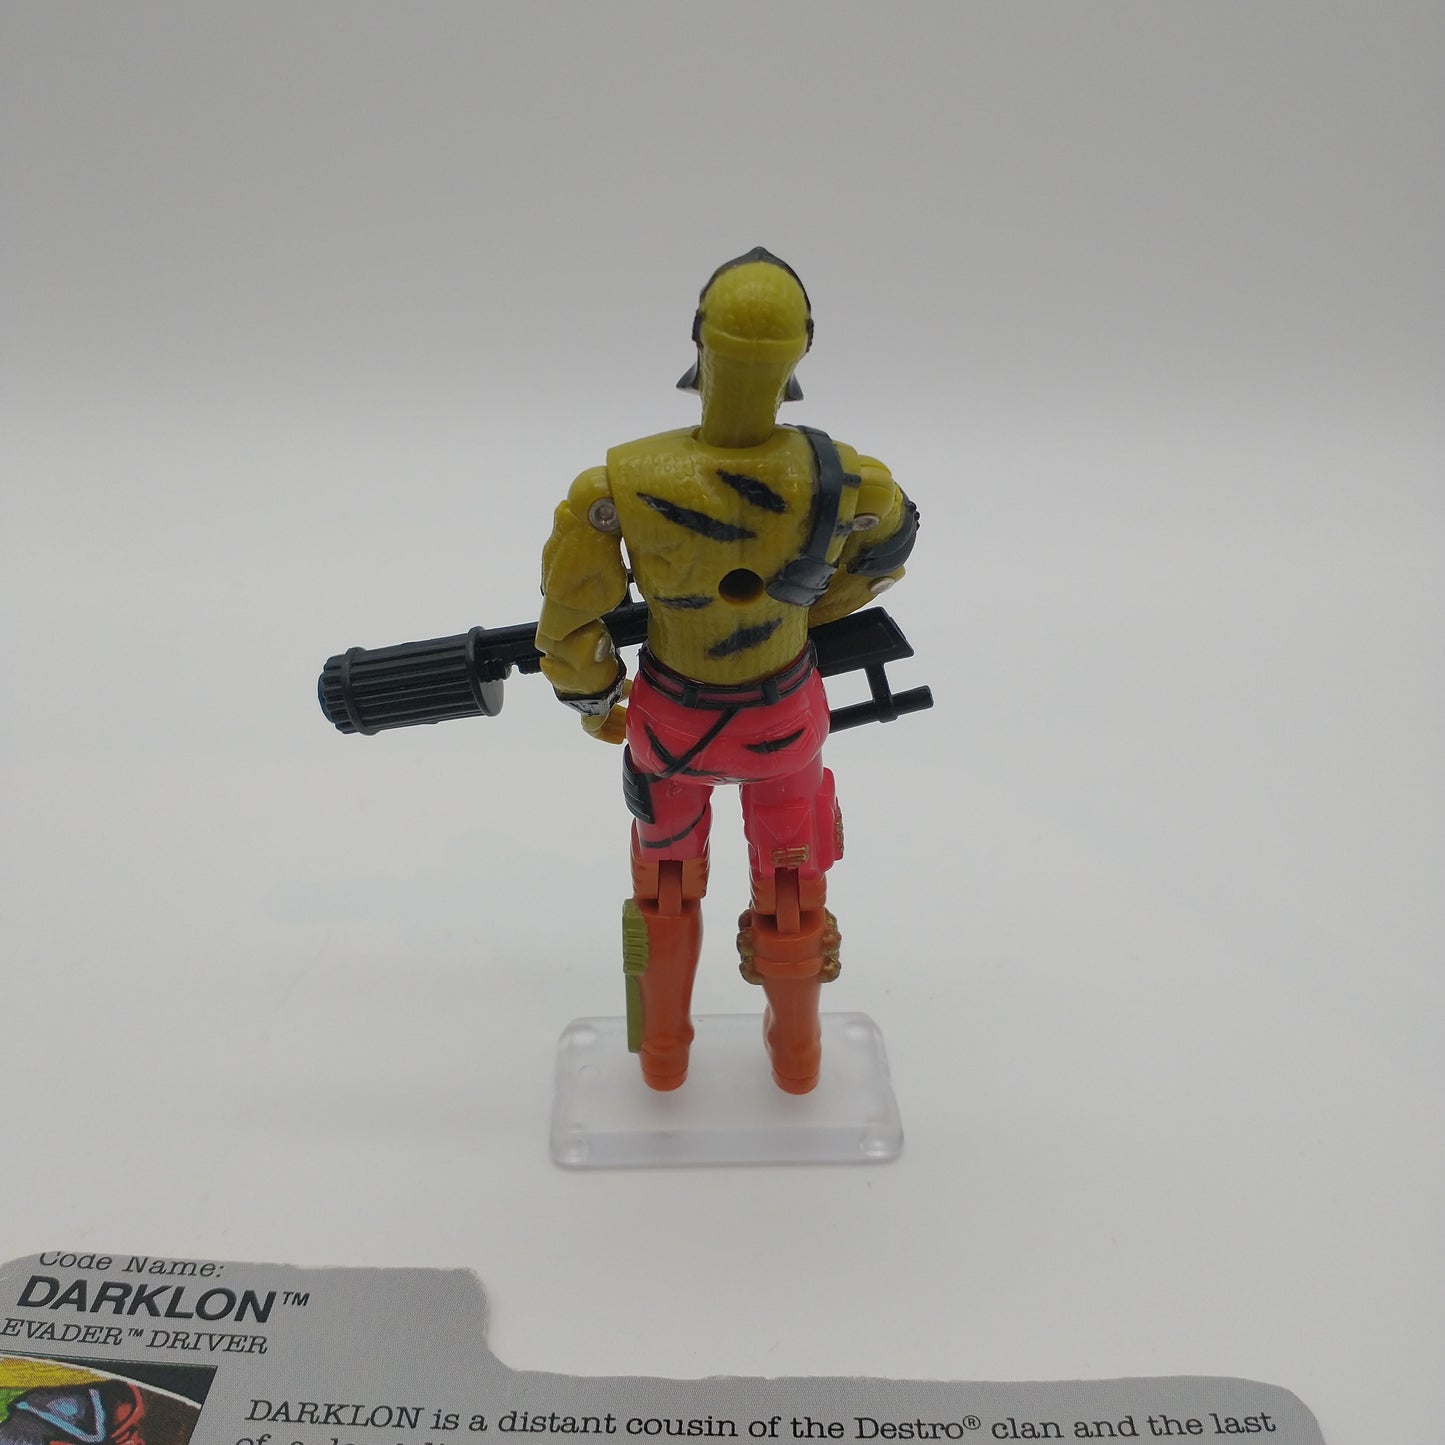 The action figure from behind